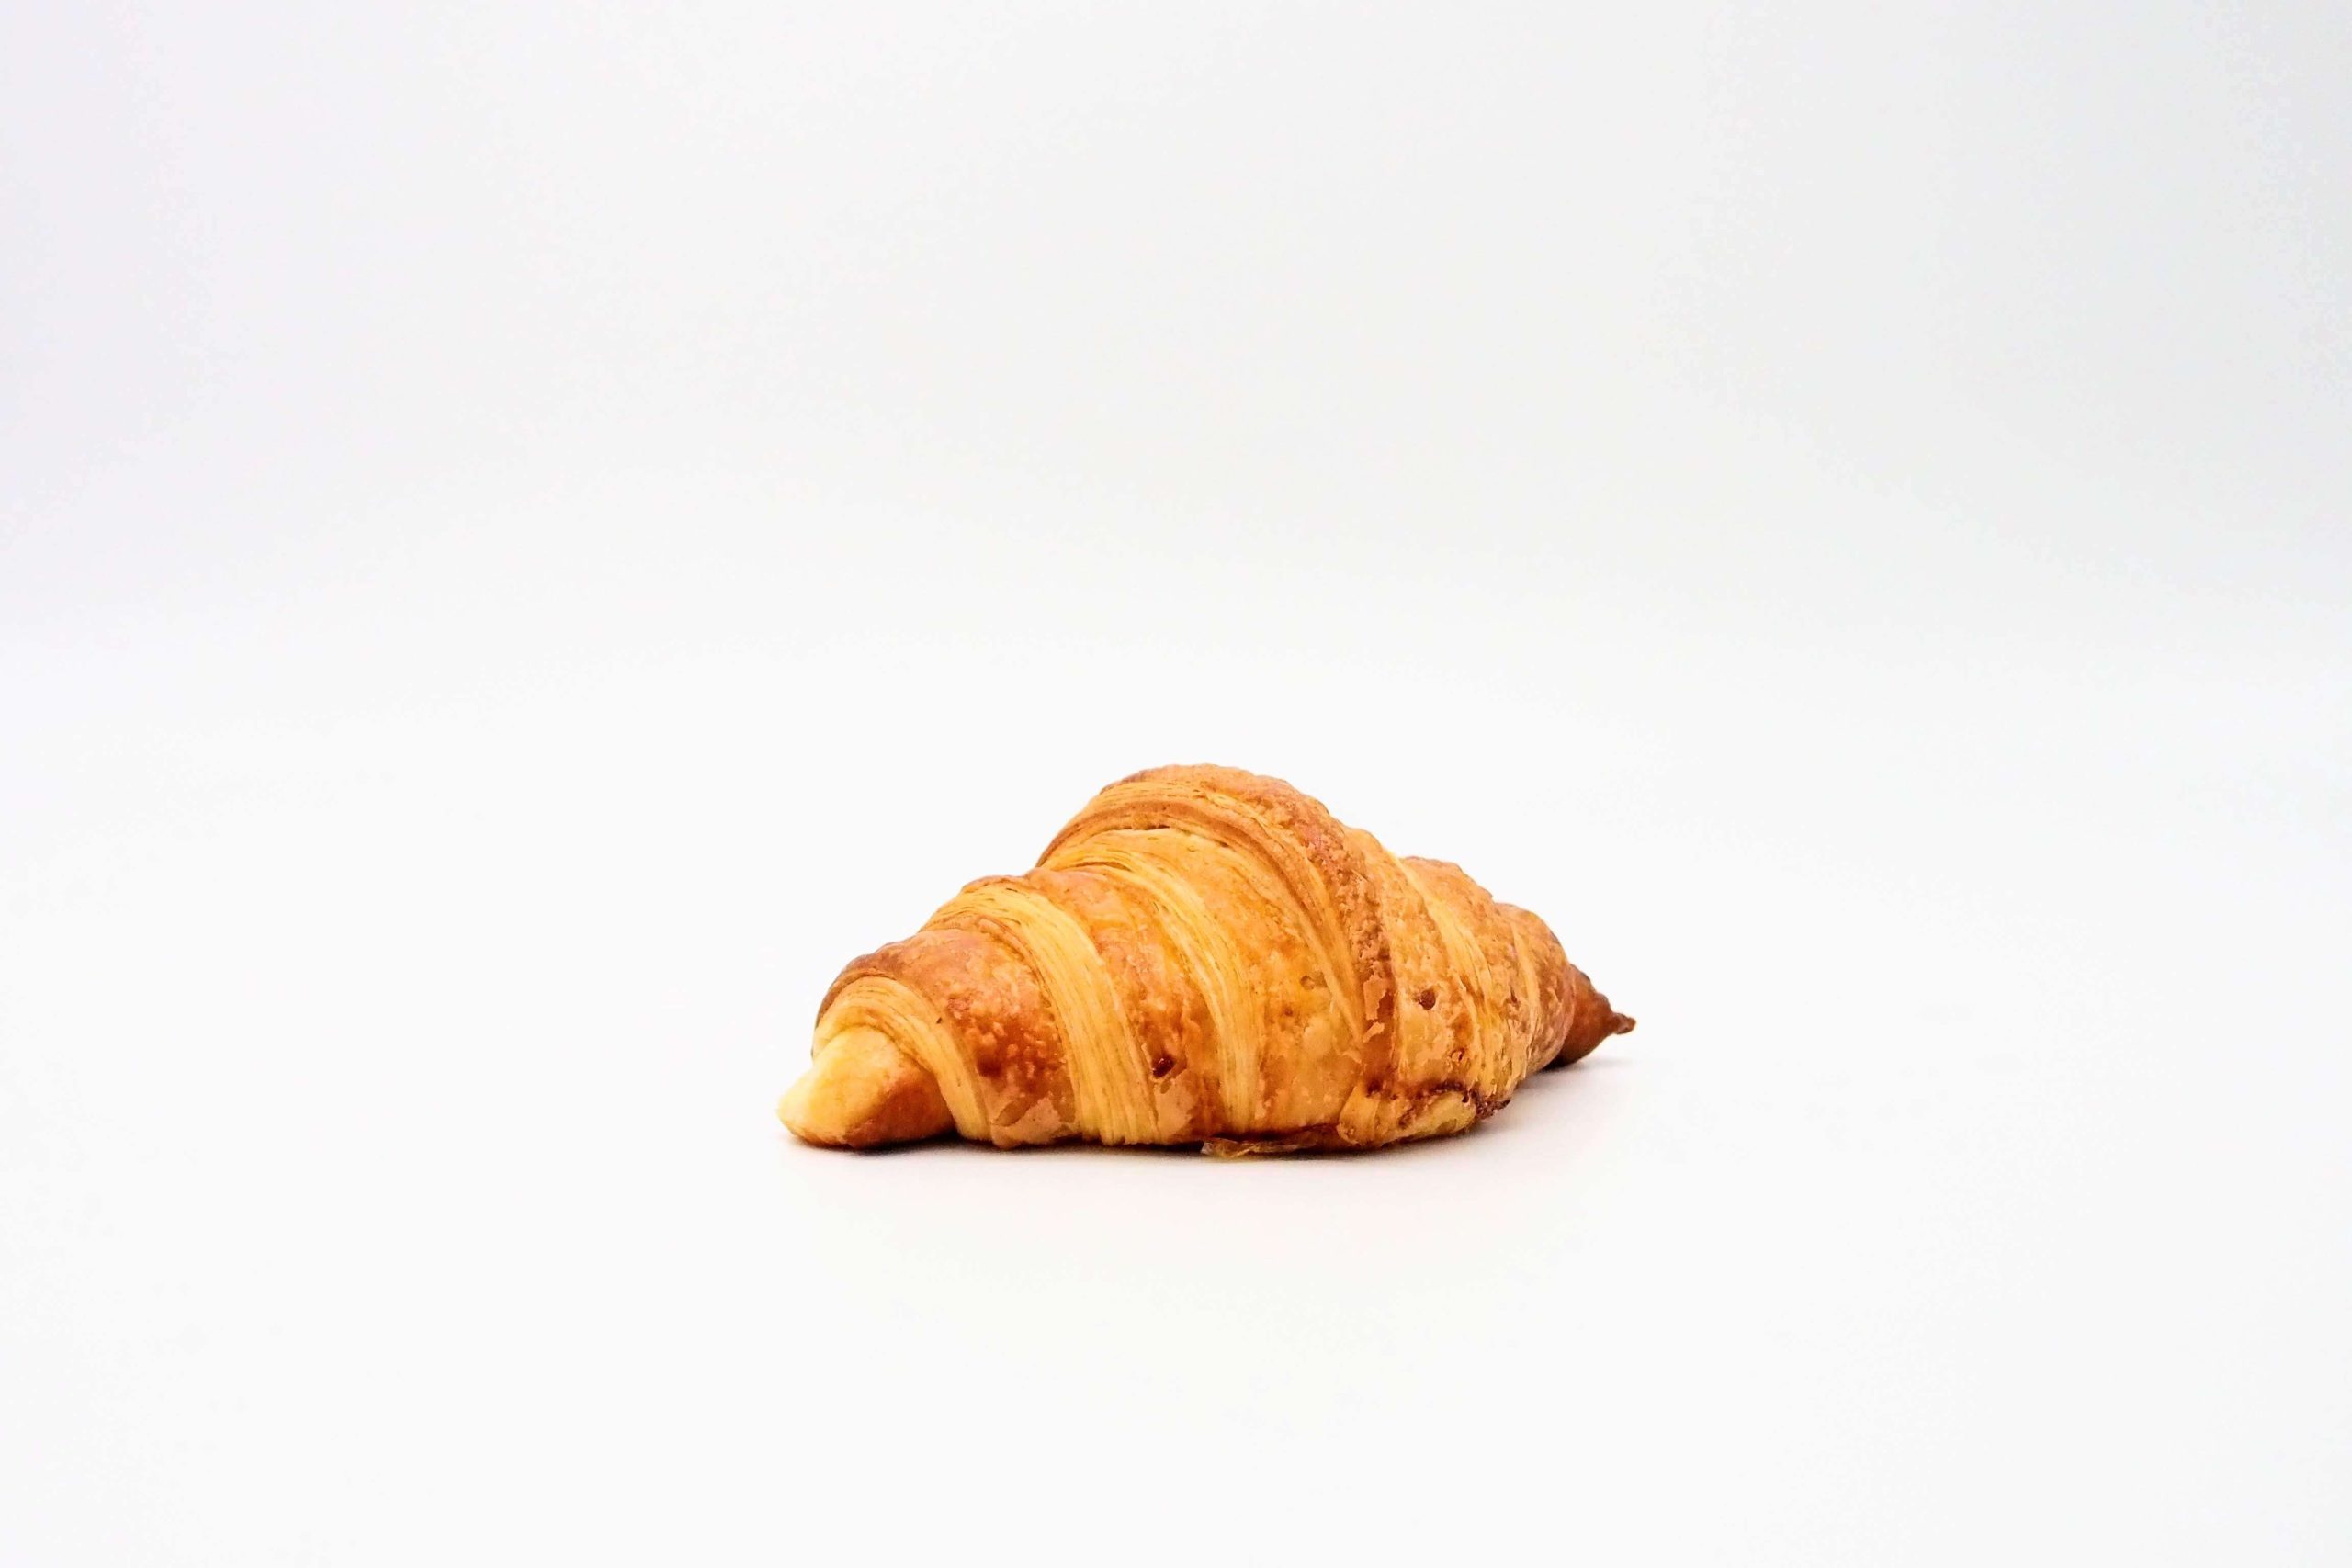 Step-by-Step Guide: How to Make Vegan Croissants from Scratch